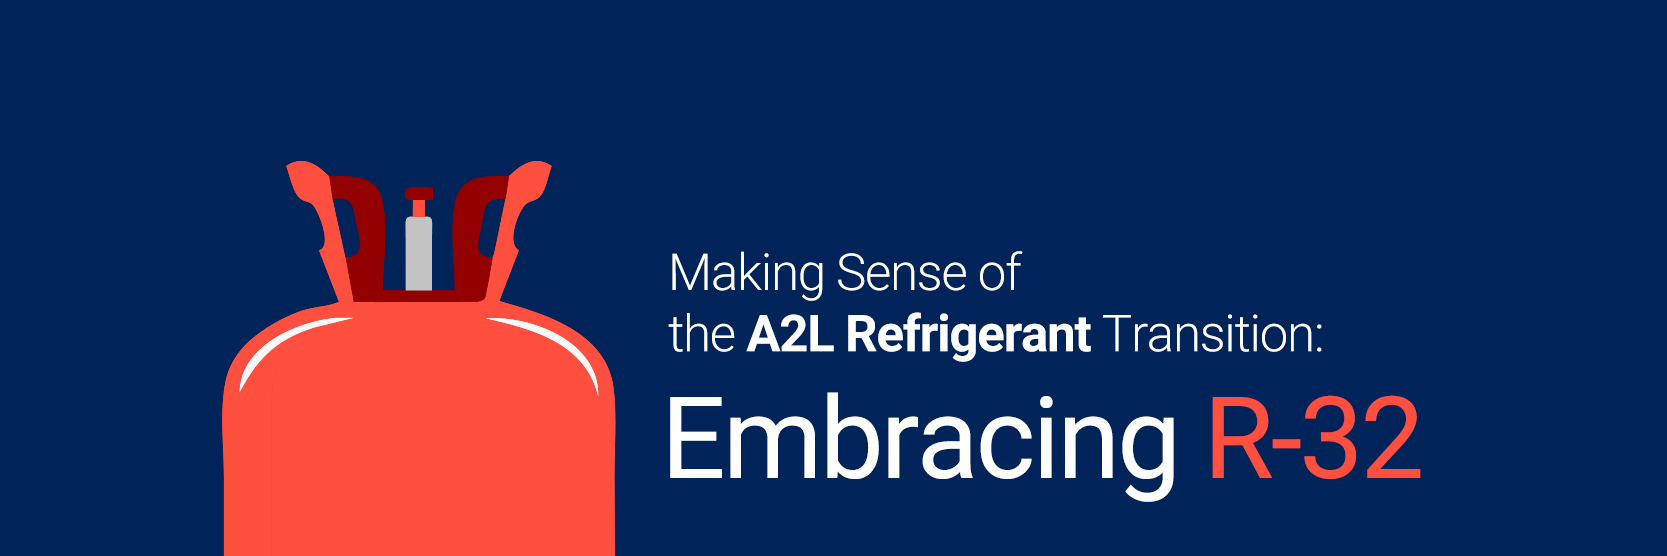 A2L Refrigerant Transition and Embracing R32